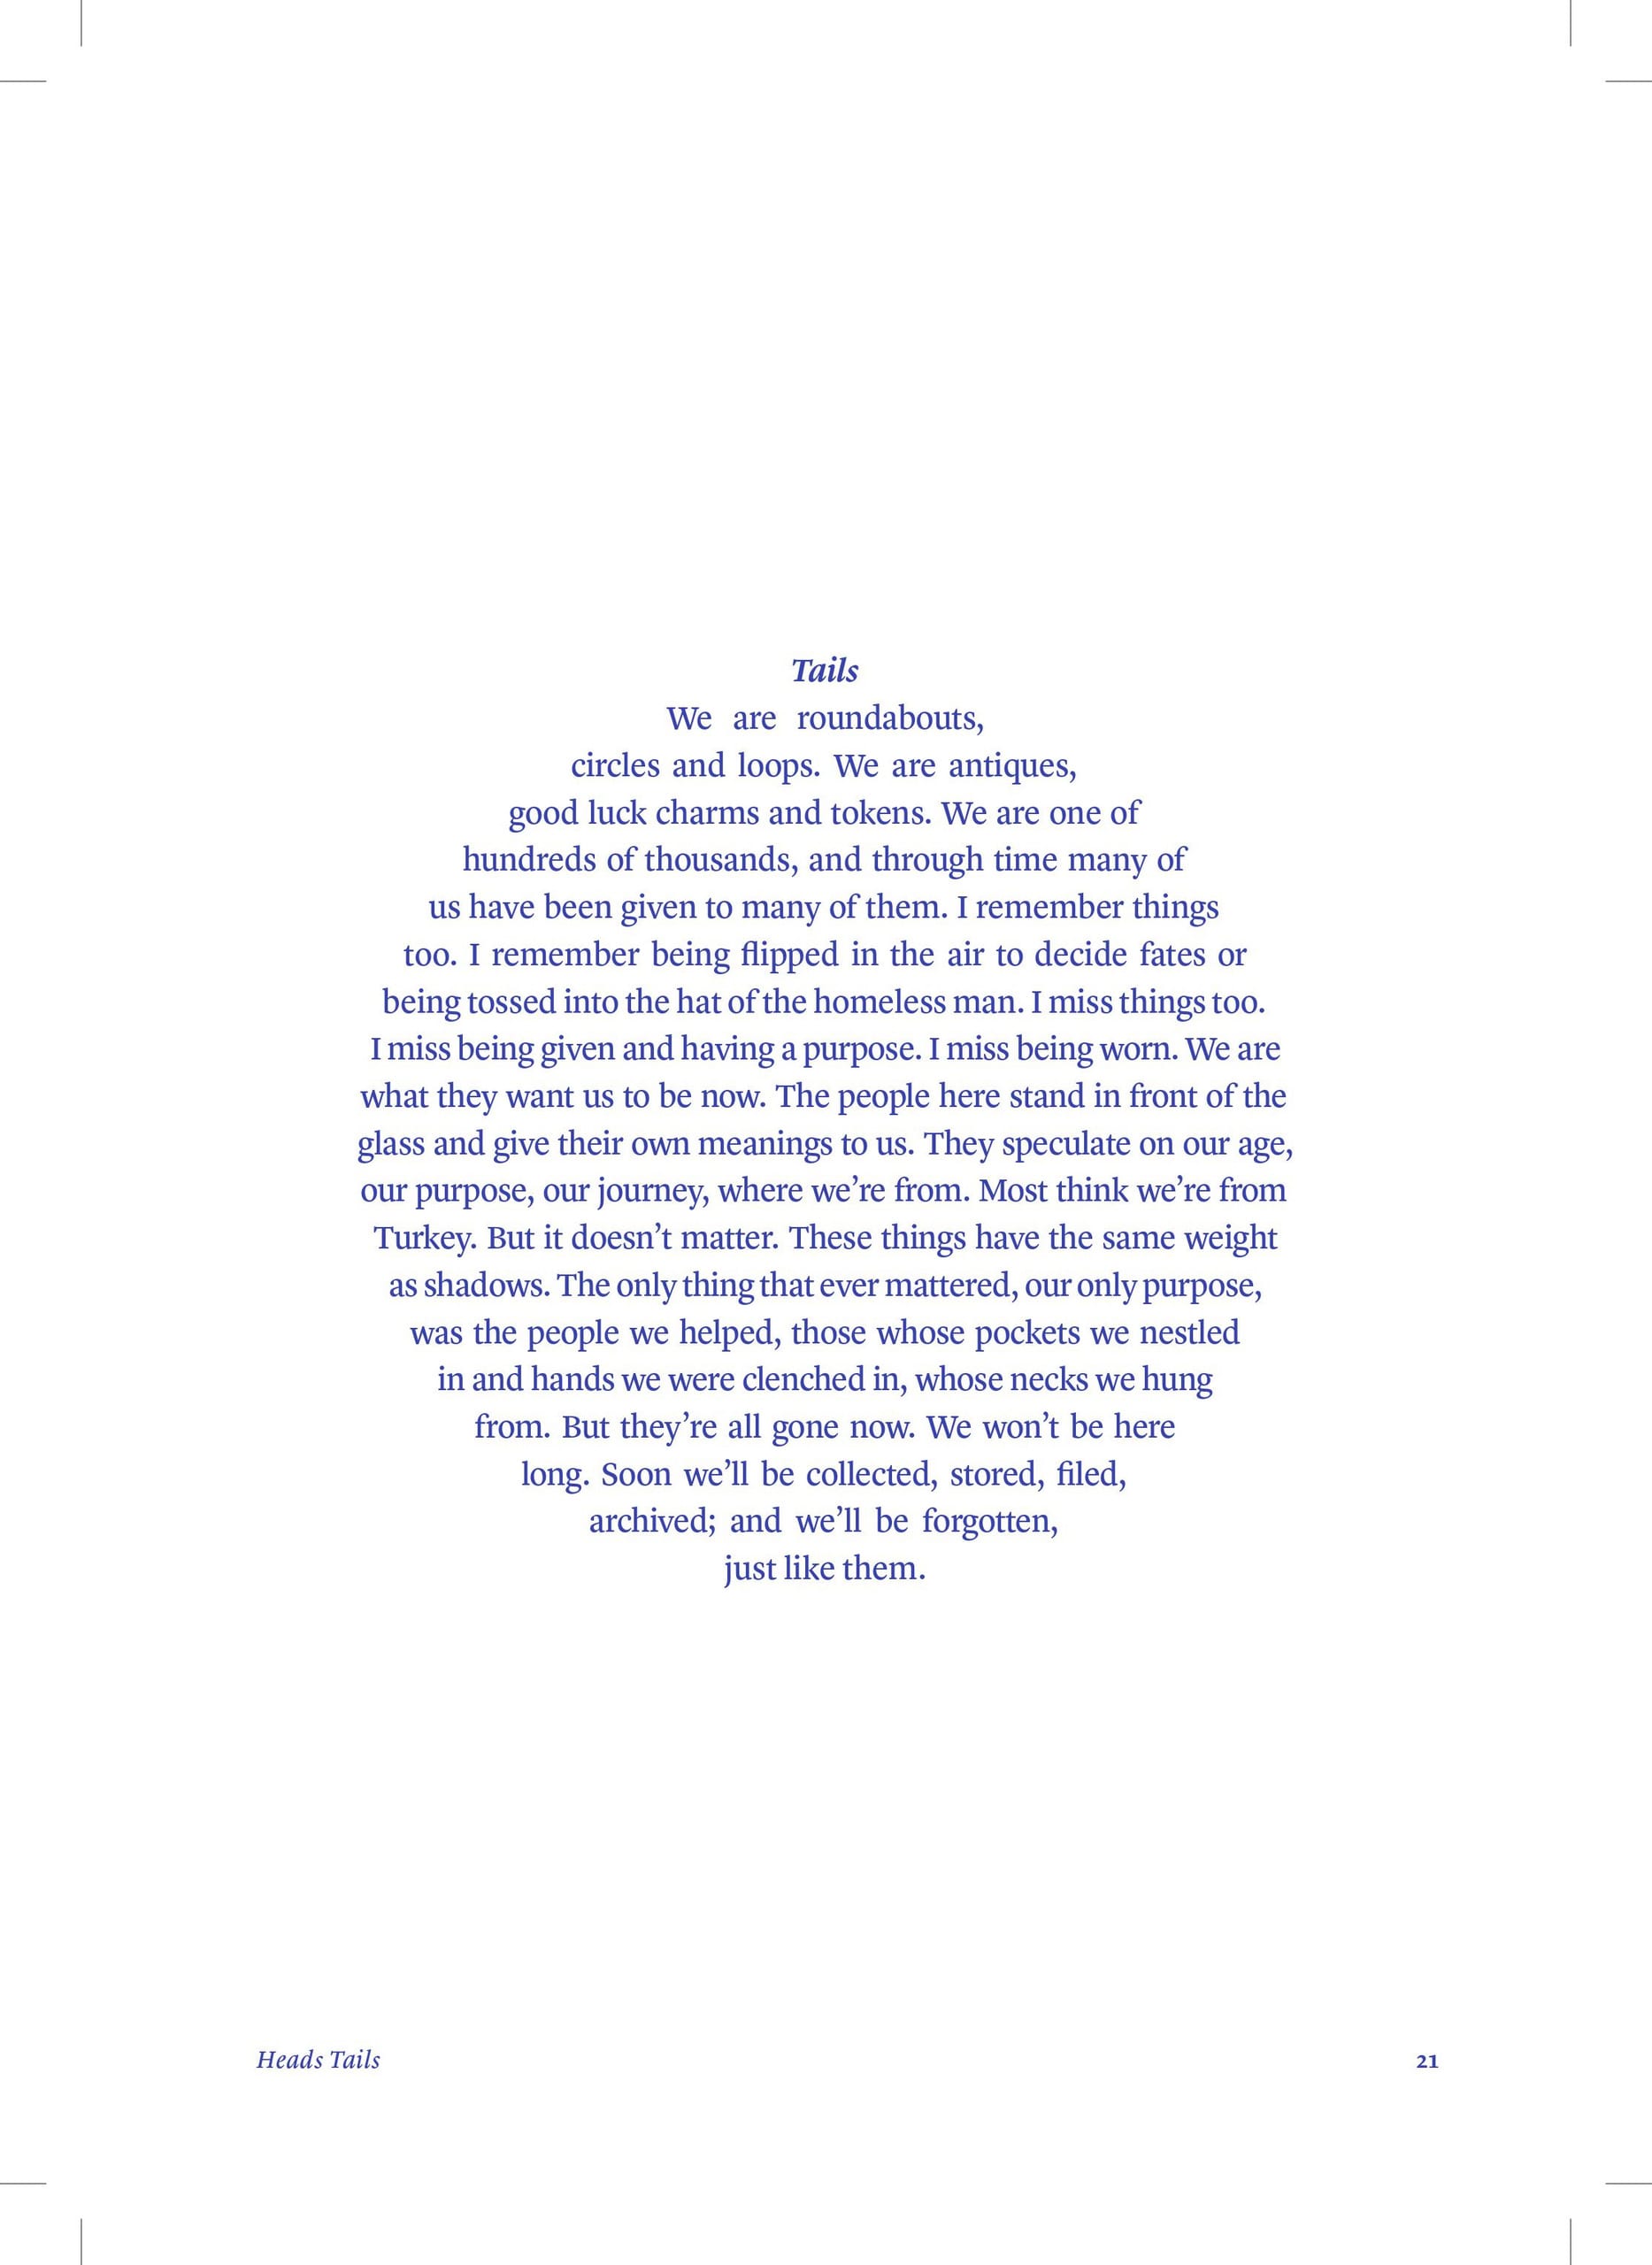 Circular piece of writing titled Tails